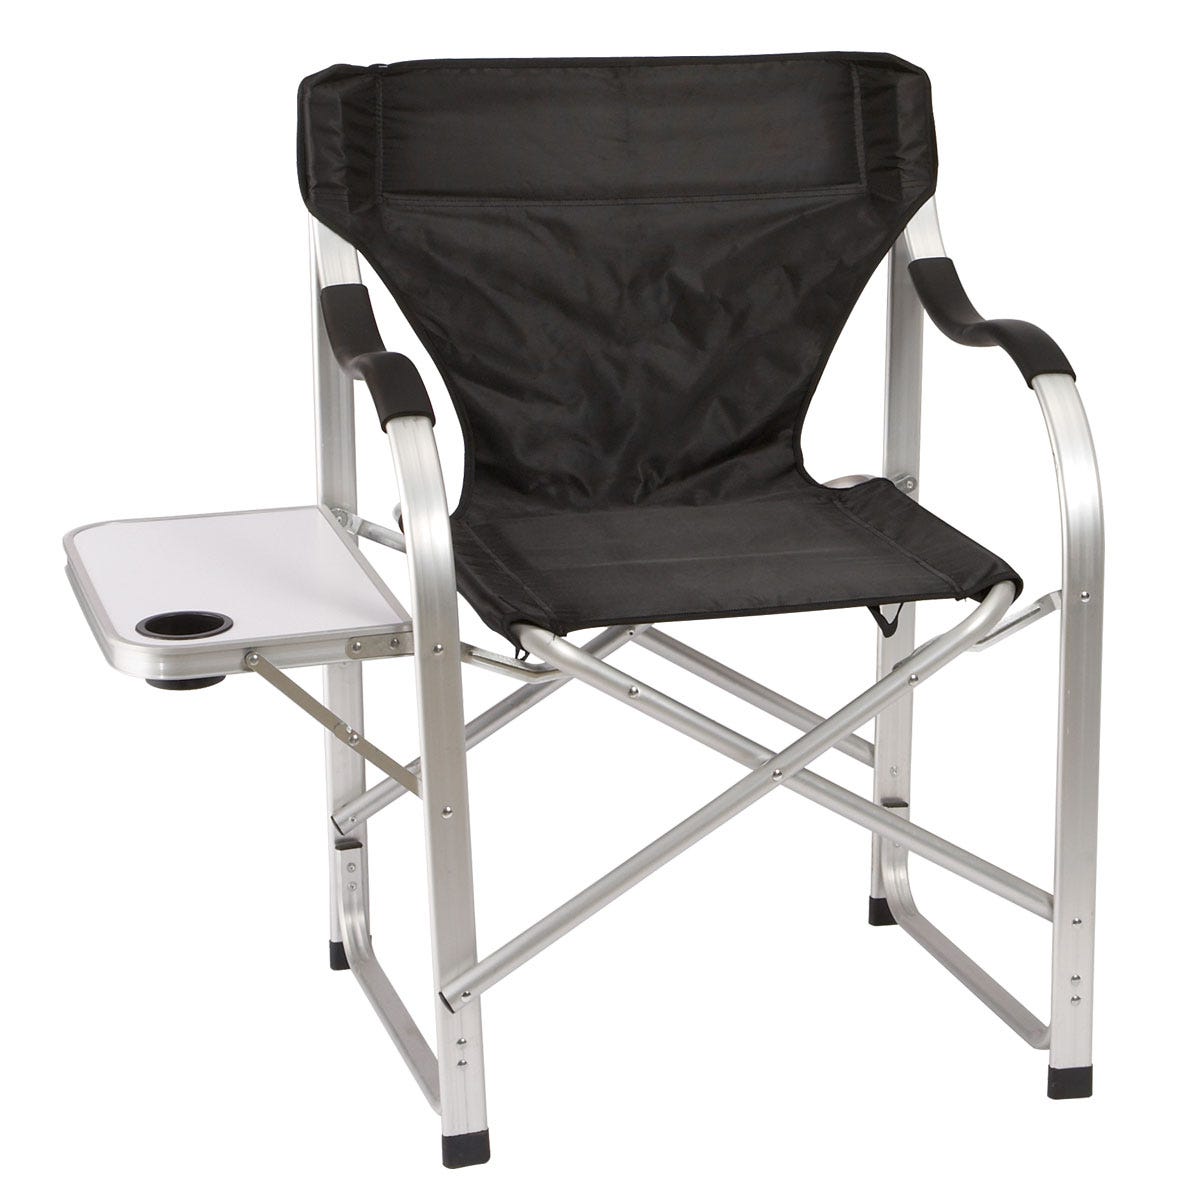 Heavy Duty Collapsible Lawn Chair (Black) - from Sportys Preferred Living